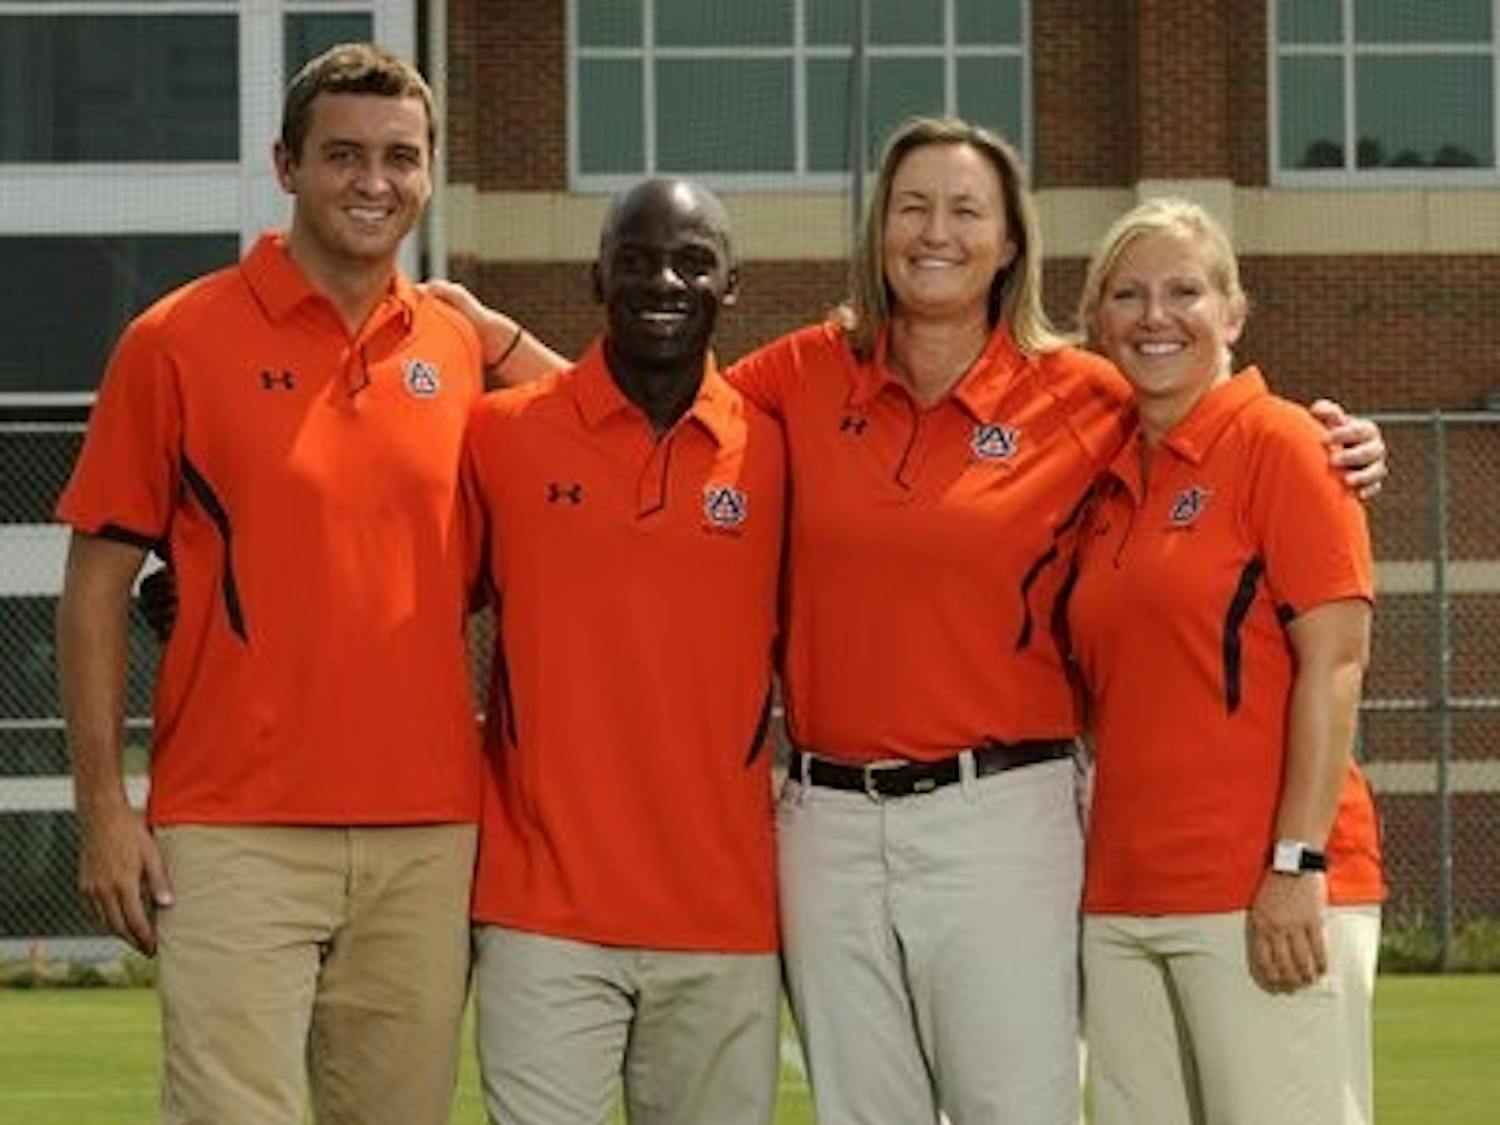 McAlpine stands with the other coaches of the Auburn women's soccer team. (Todd Van Emst / Media Relations)